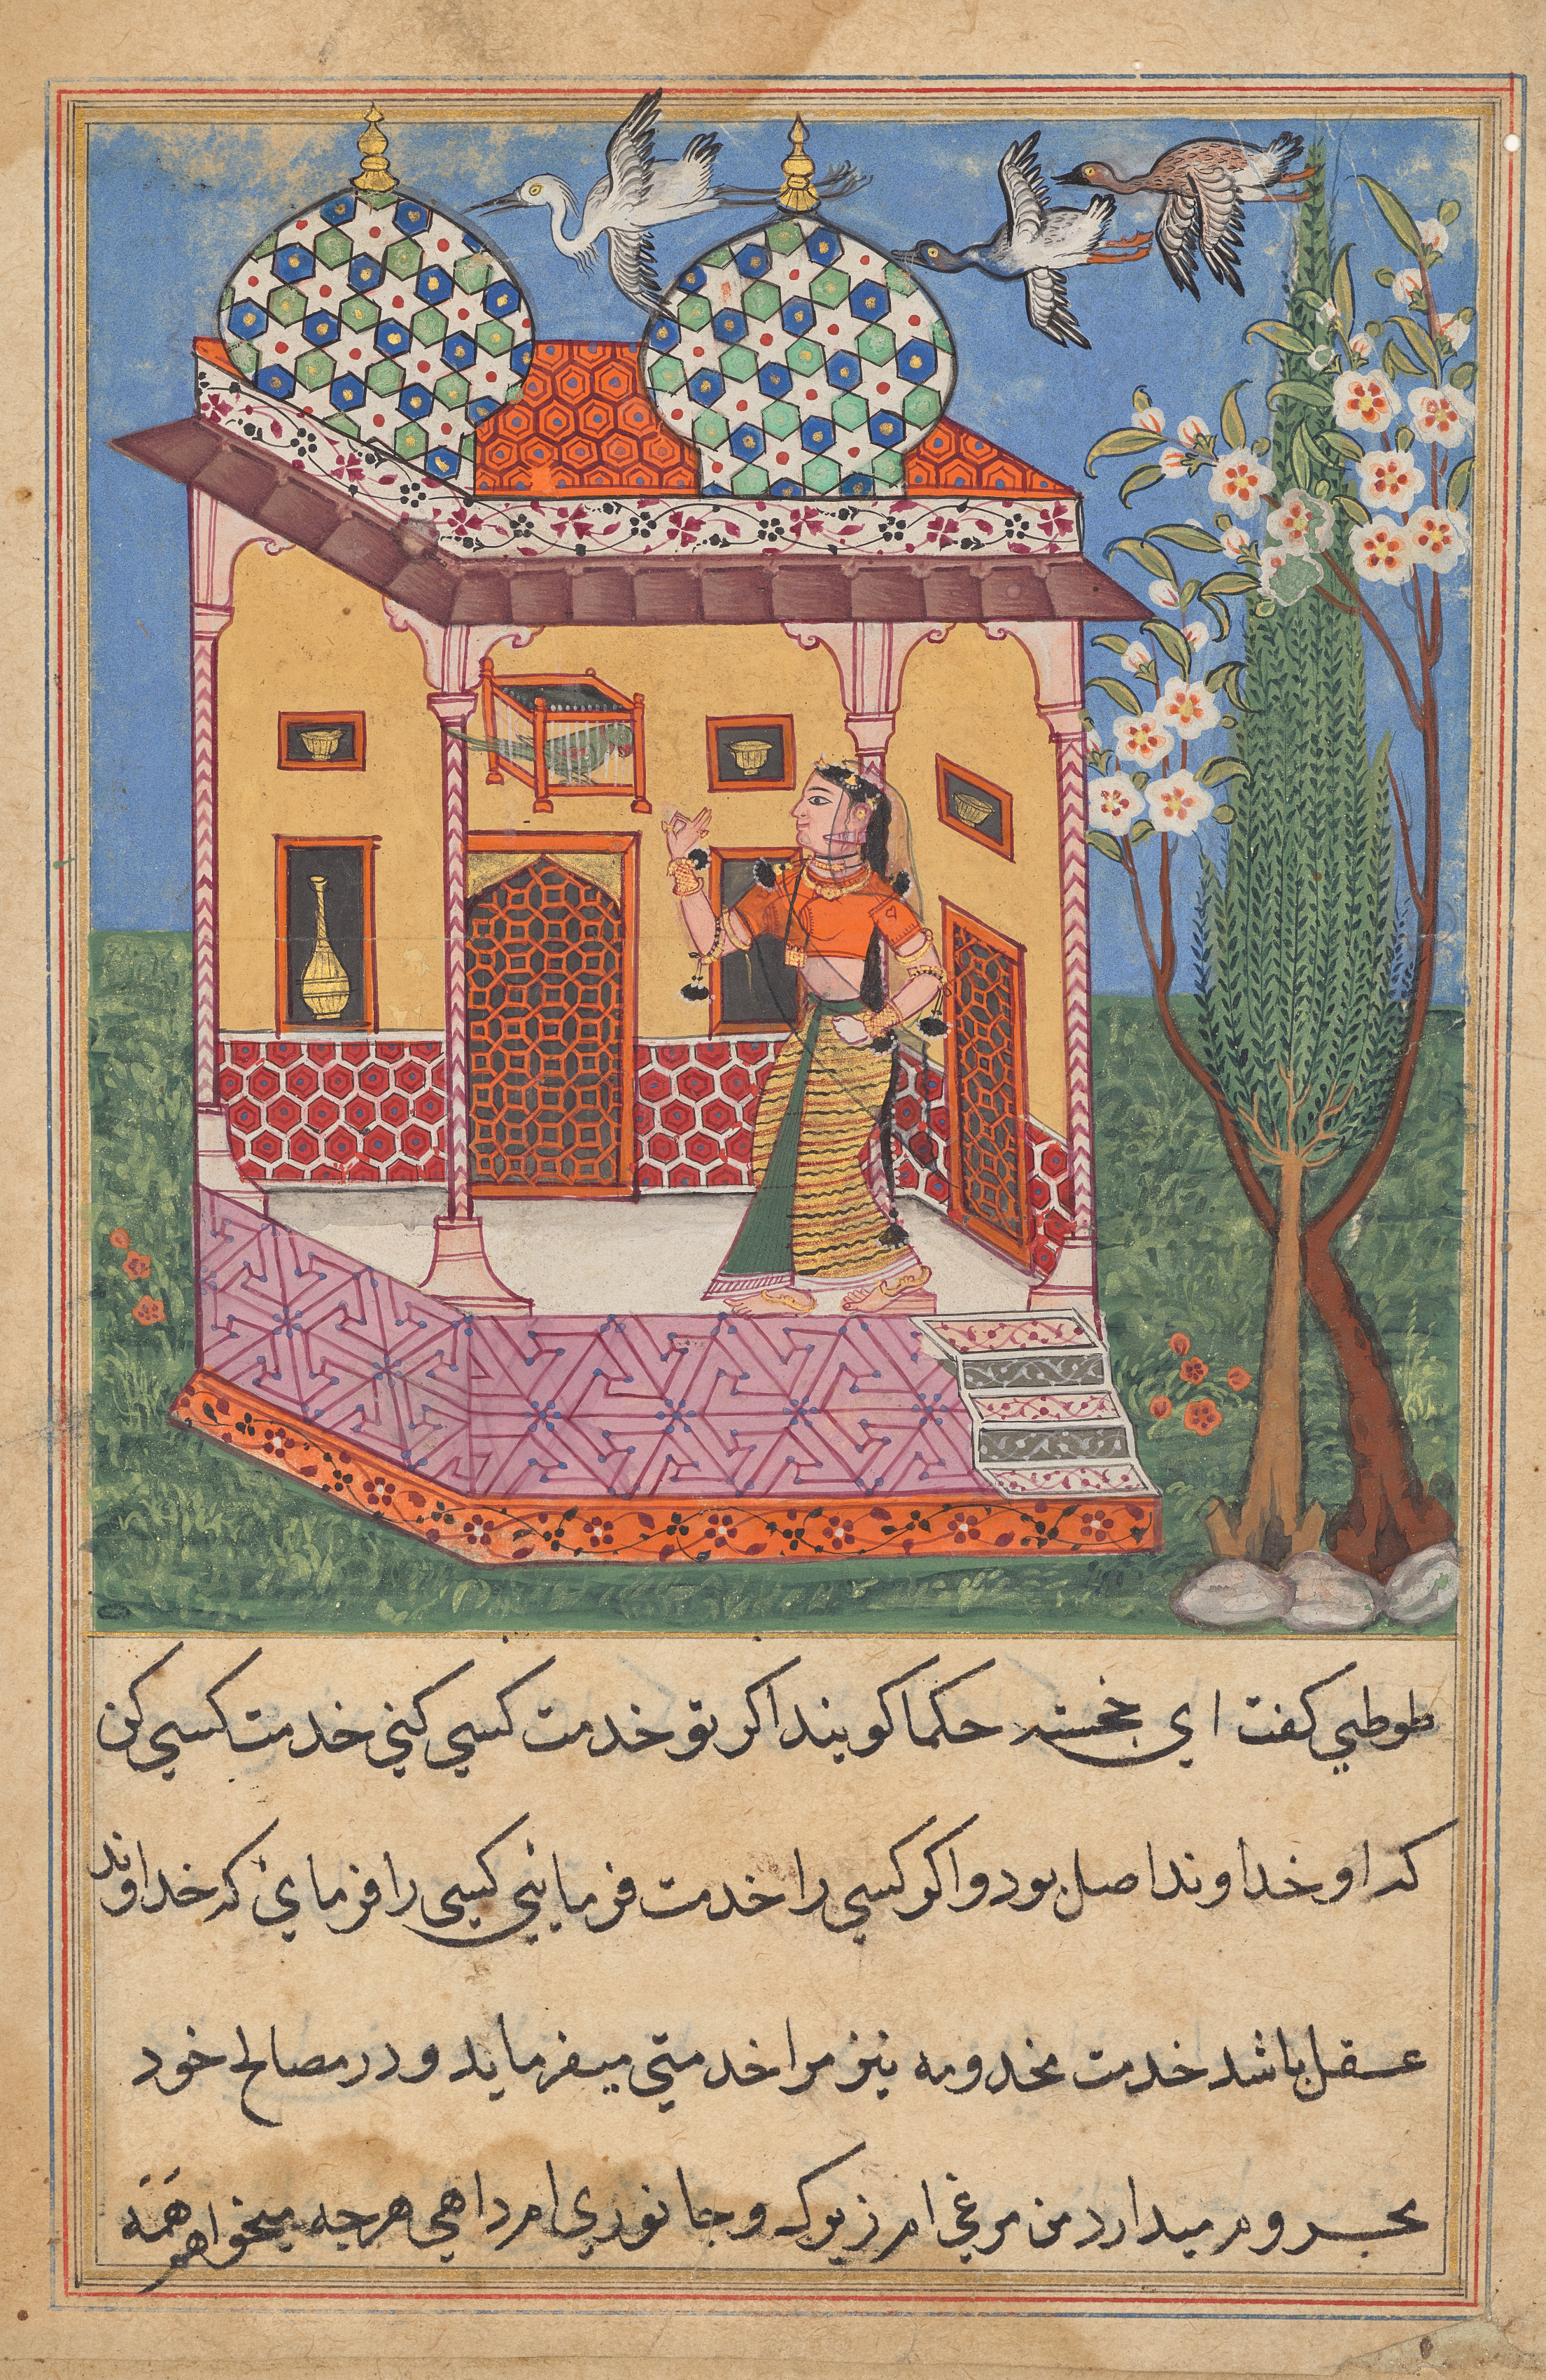 The Parrot Addresses Khujasta at the Beginning of the Twenty-sixth Night, from a Tuti-nama (Tales of a Parrot)